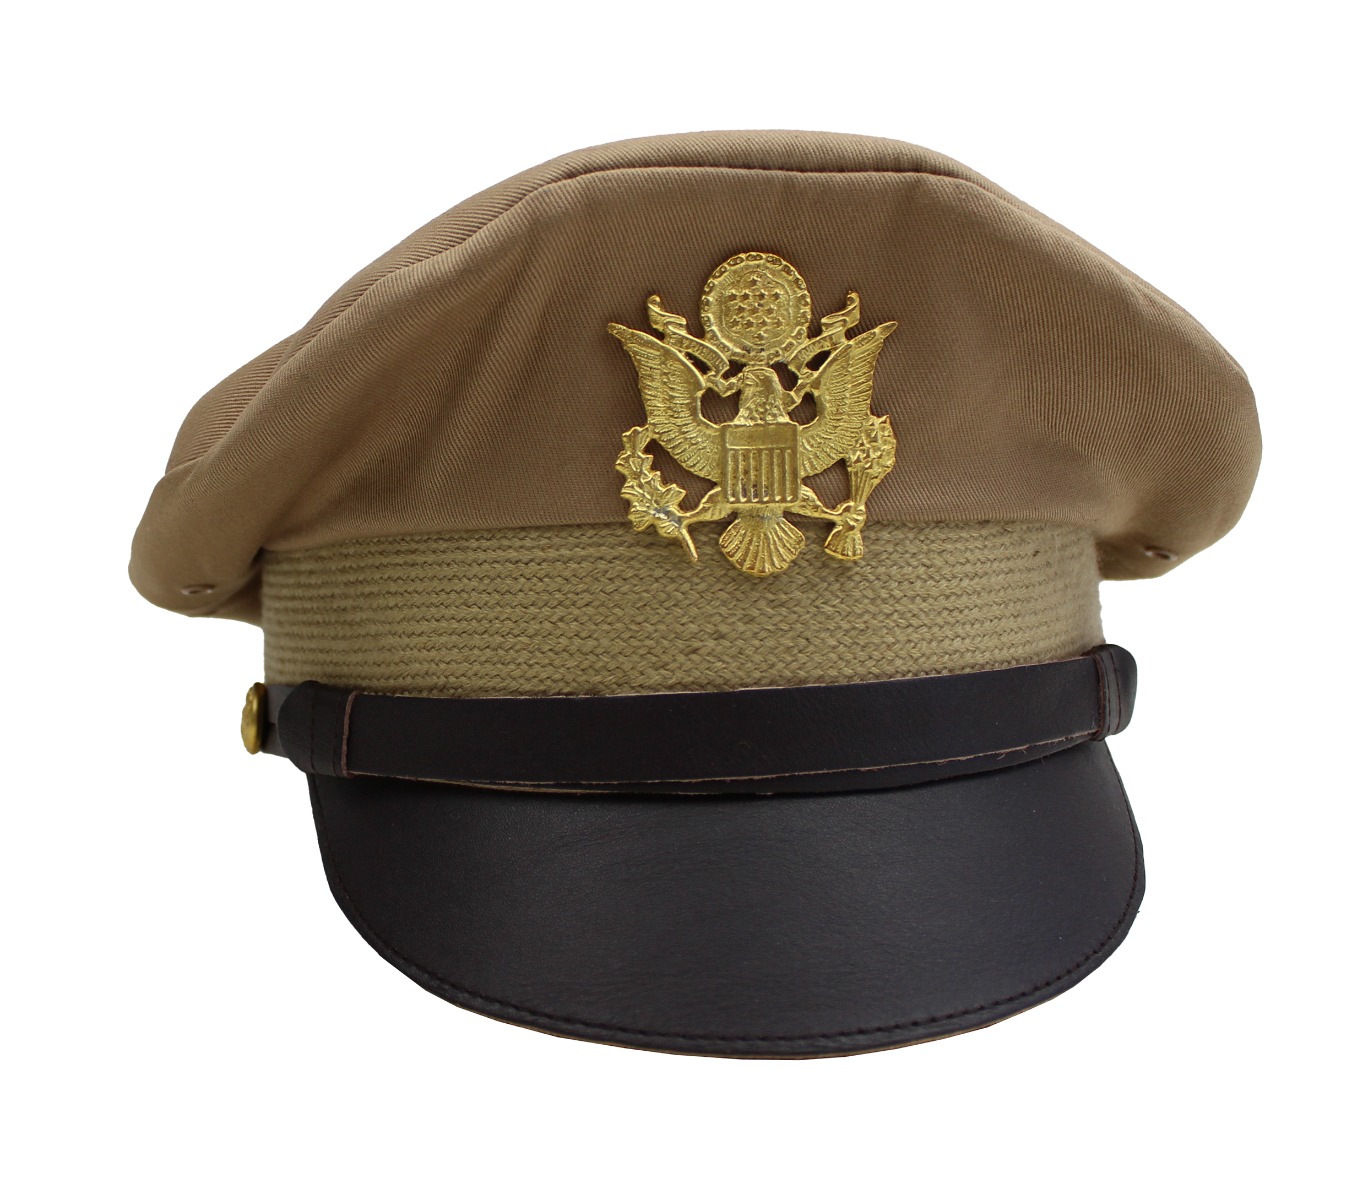 AMERICAN ARMY AIR FORCE OFFICER KHAKI 50 MISSION CAP - REPRODUCTION